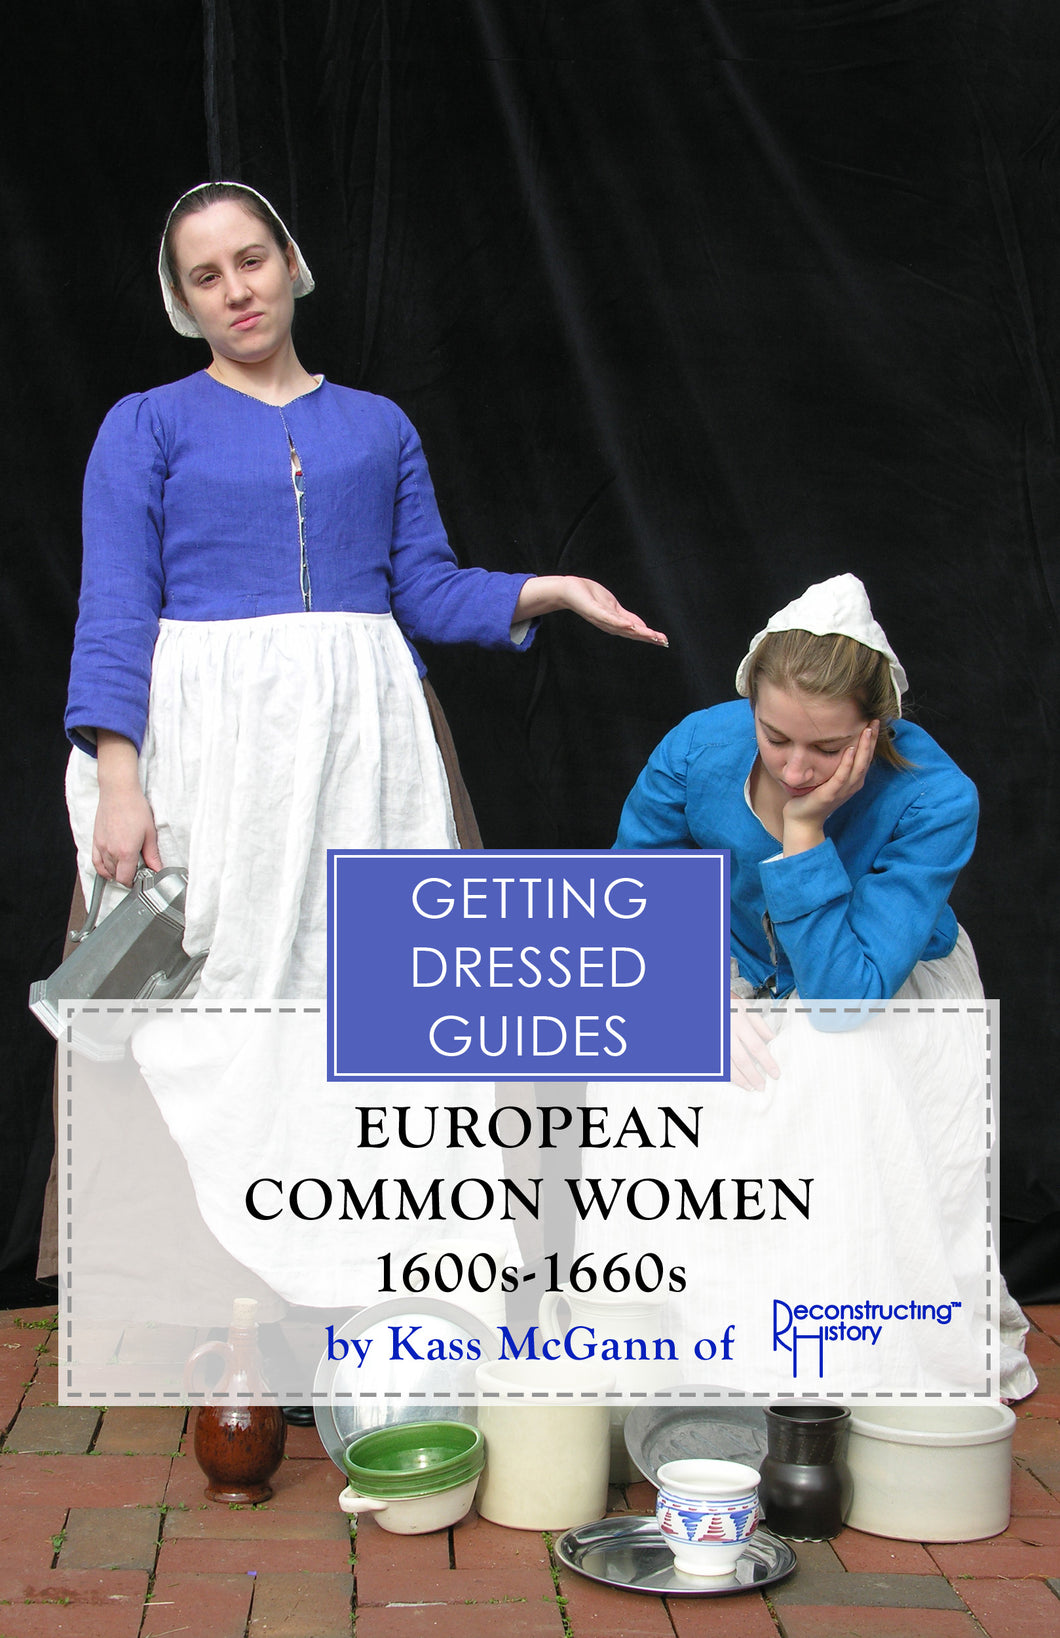 Early 17th century European Common Women's Getting Dressed Guide